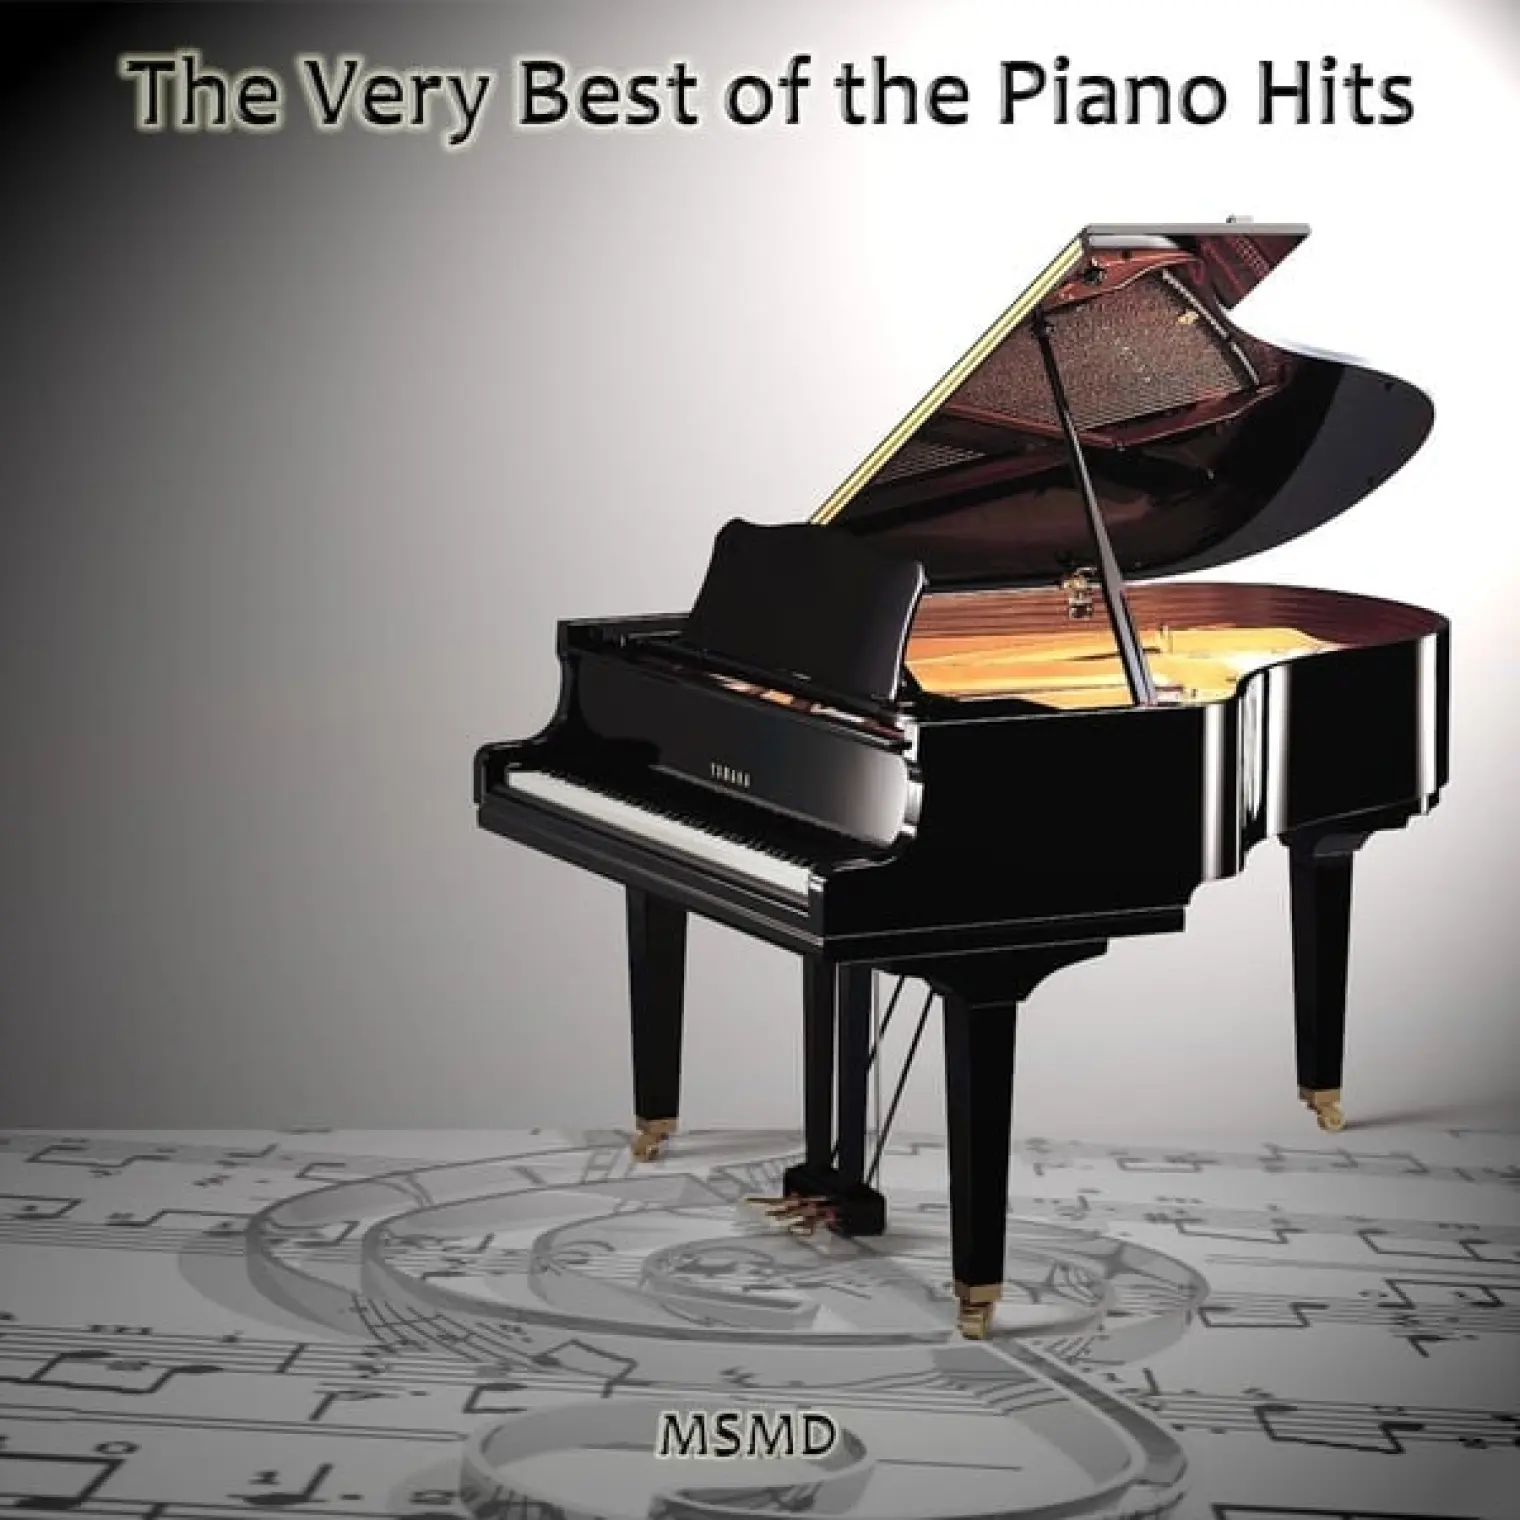 The Very Best of the Piano Hits -  Msmd 